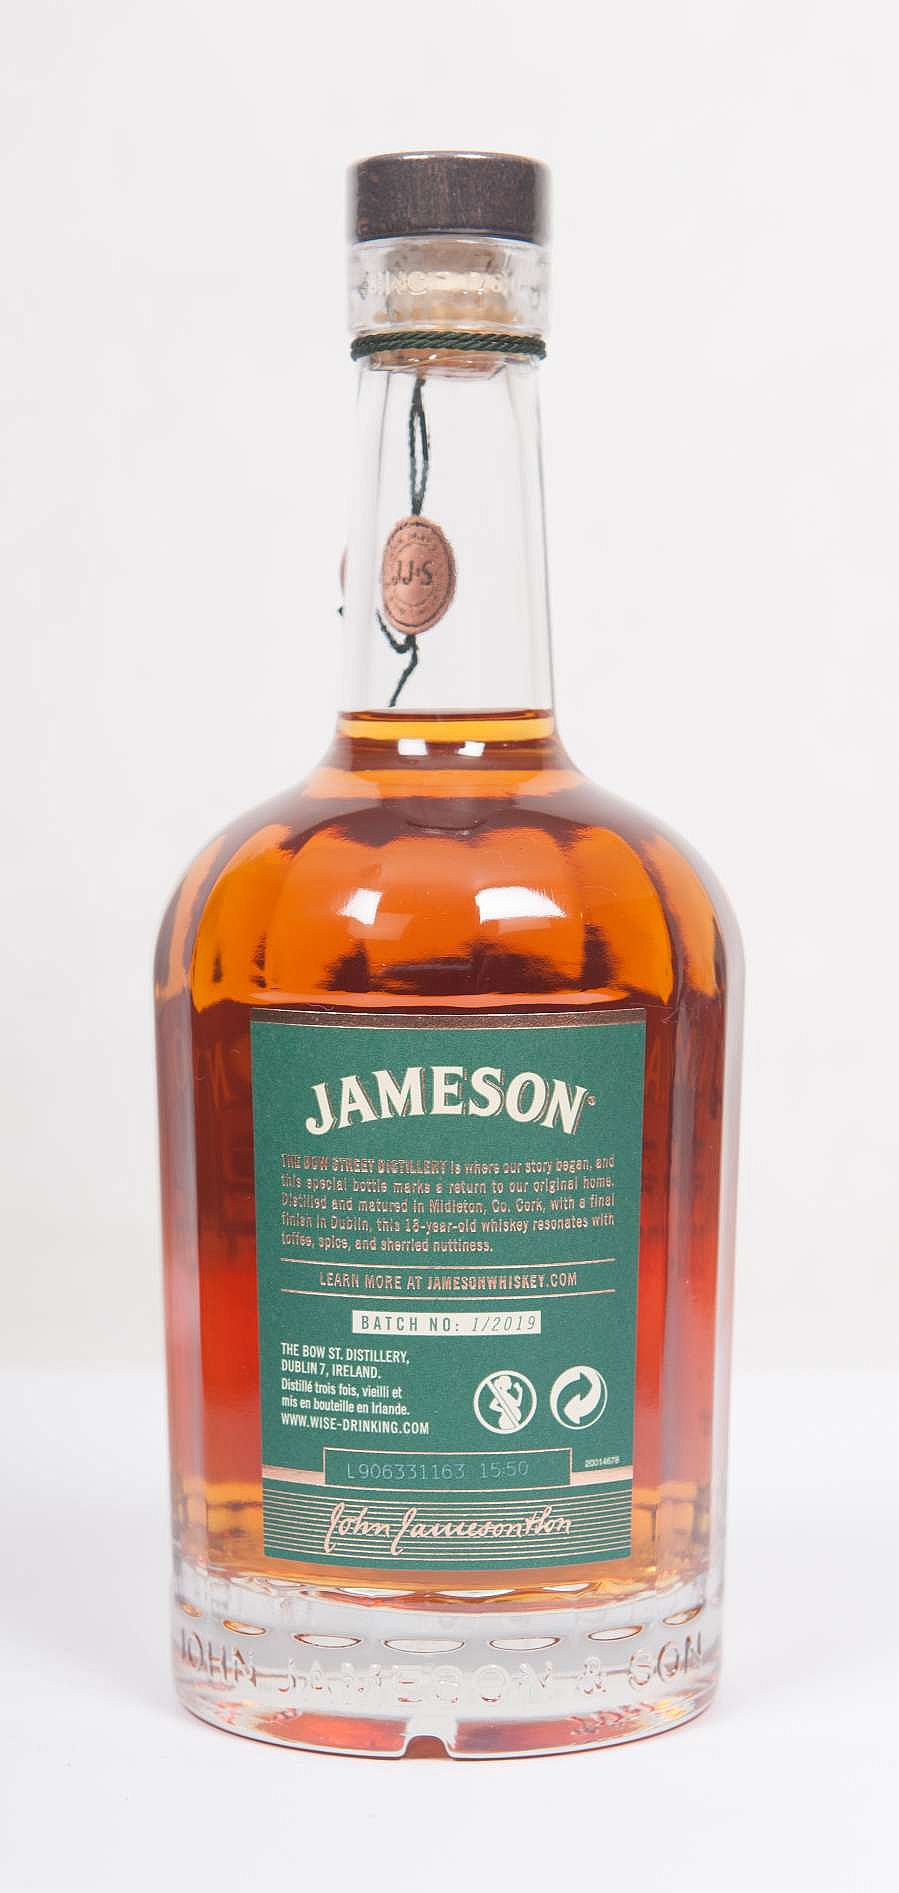 Jameson 18 year old Cask Strength, Bow Street